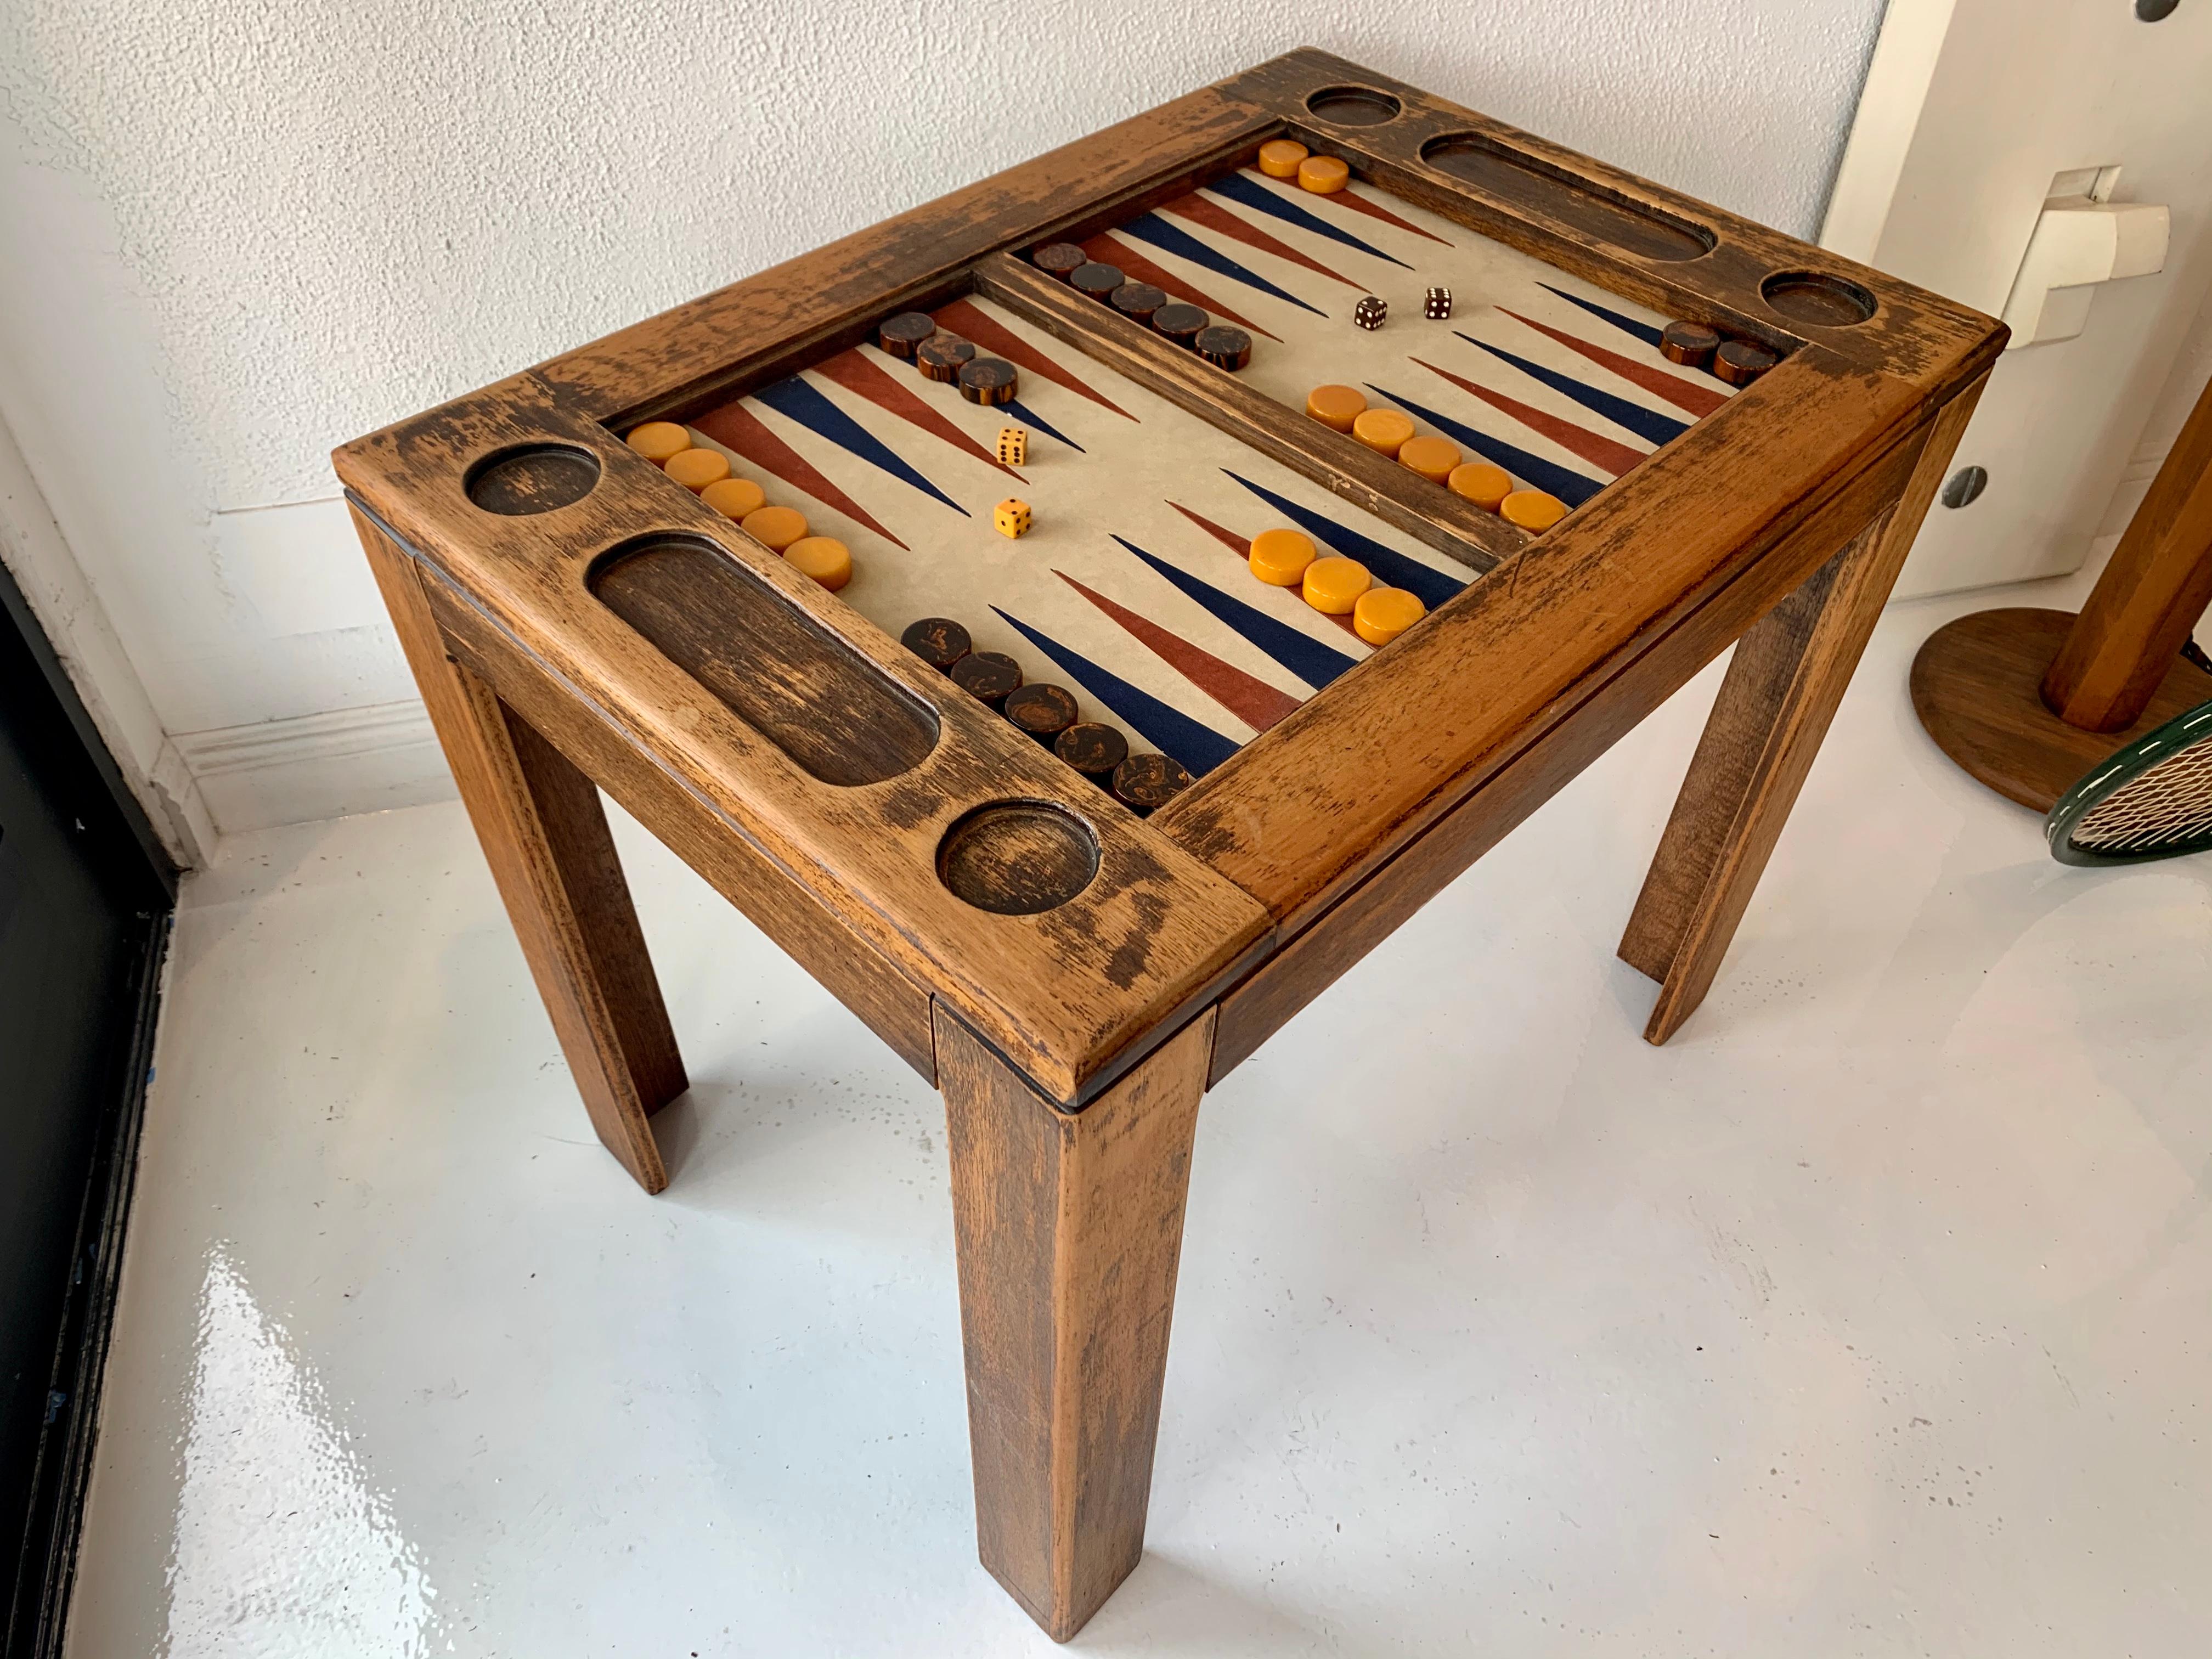 Classic oak backgammon table in original rustic oak finish.. Suede game board with red and blue triangles. Smoked glass top, bone dice and original Bakelite game pieces included with purchase. Great colors and the perfect scale.